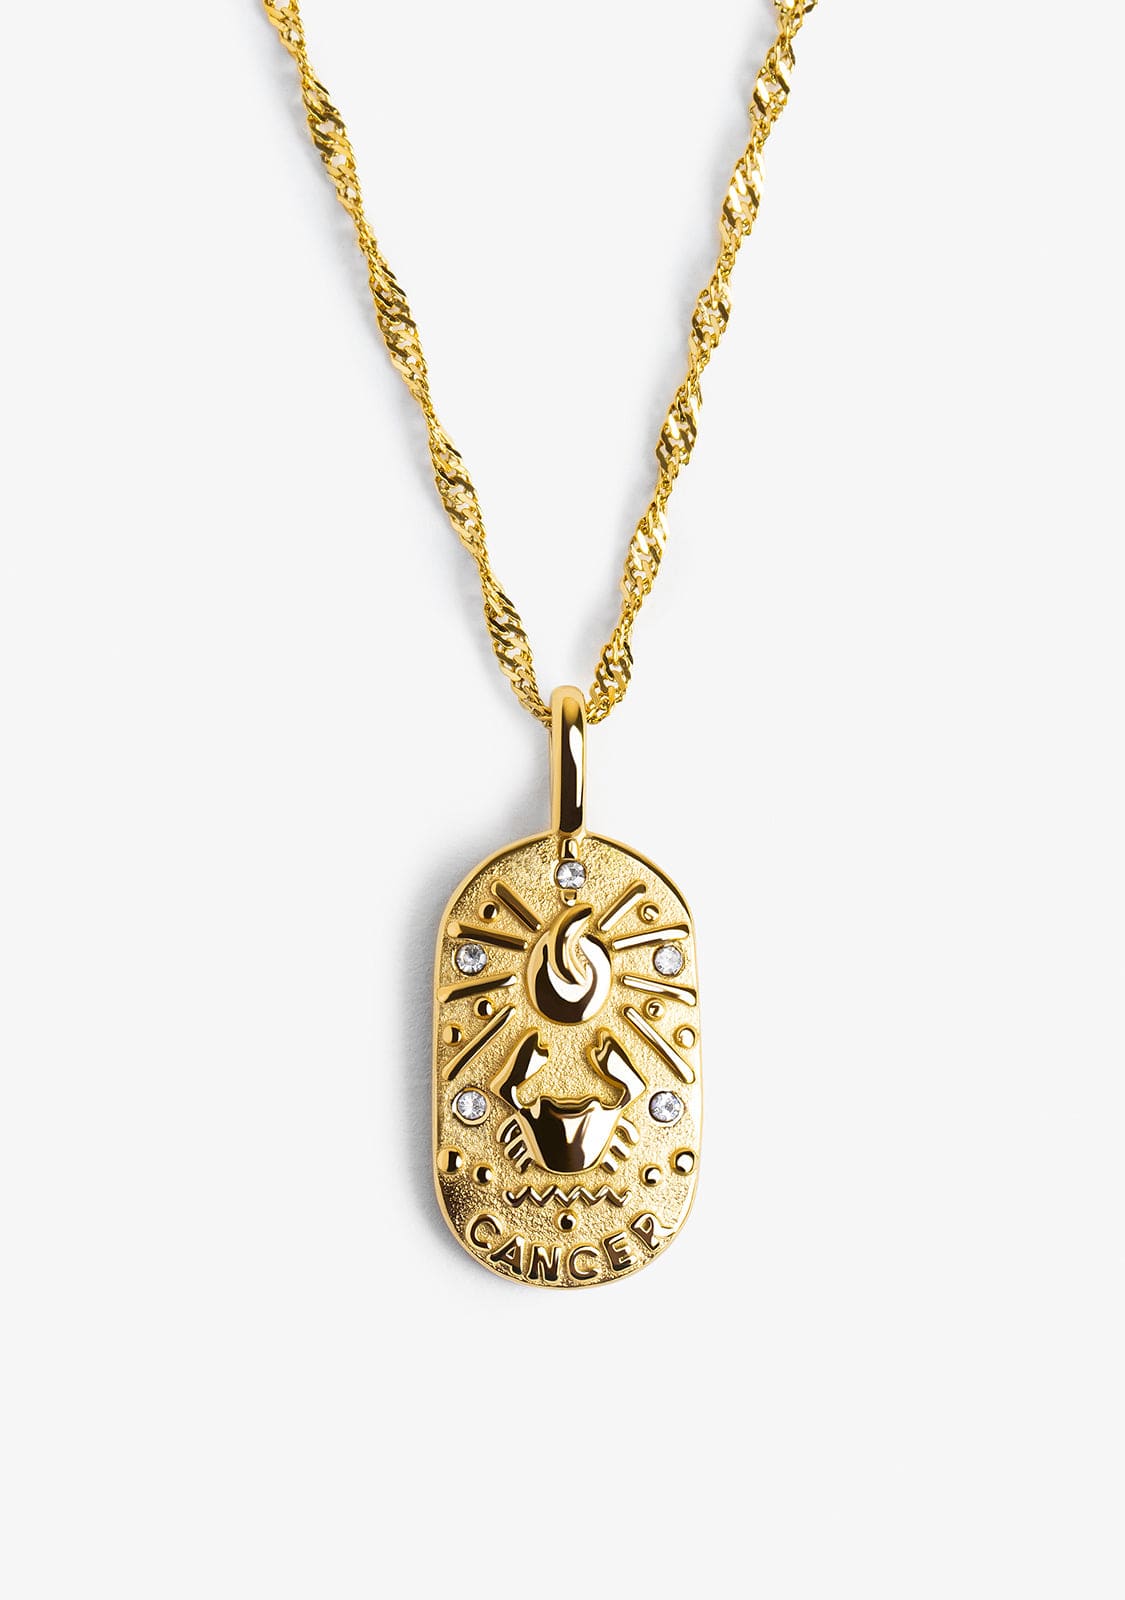 Cancer Zodiac Necklace Steel Gold